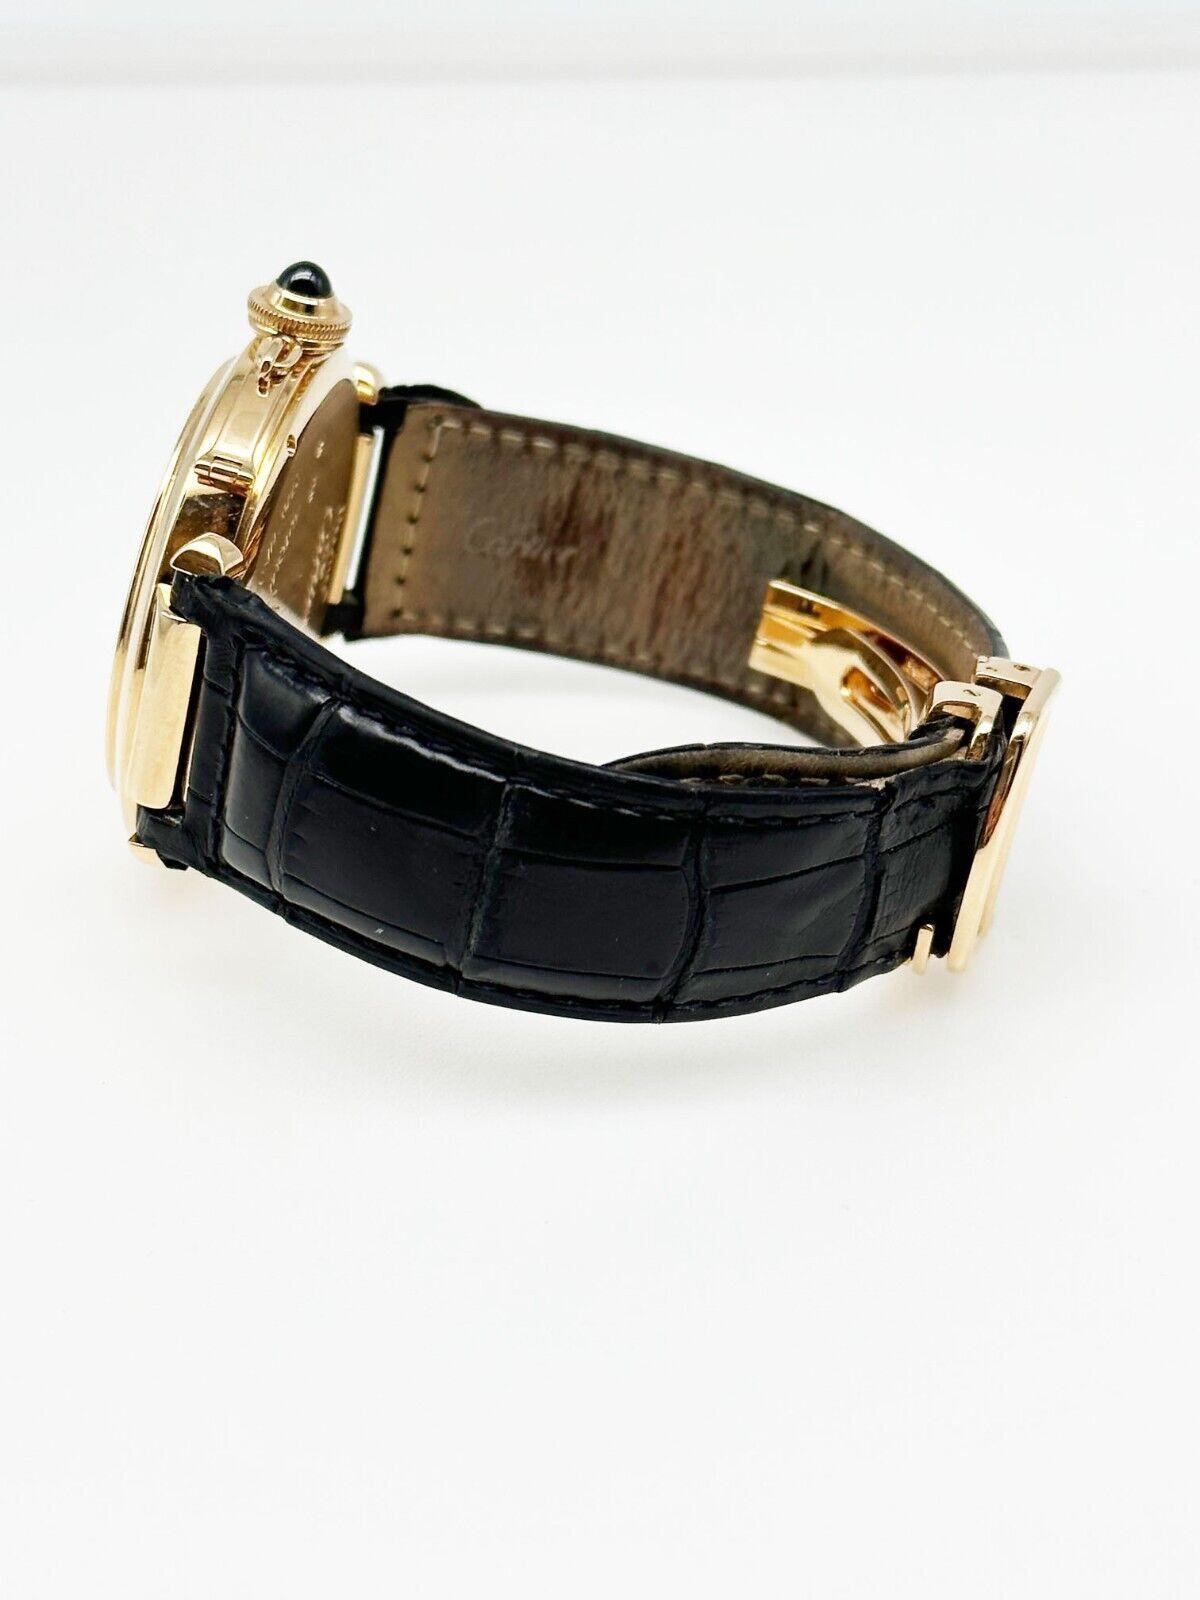 Cartier 2770 Pasha 18K Rose Gold Leather Strap In Excellent Condition For Sale In San Diego, CA